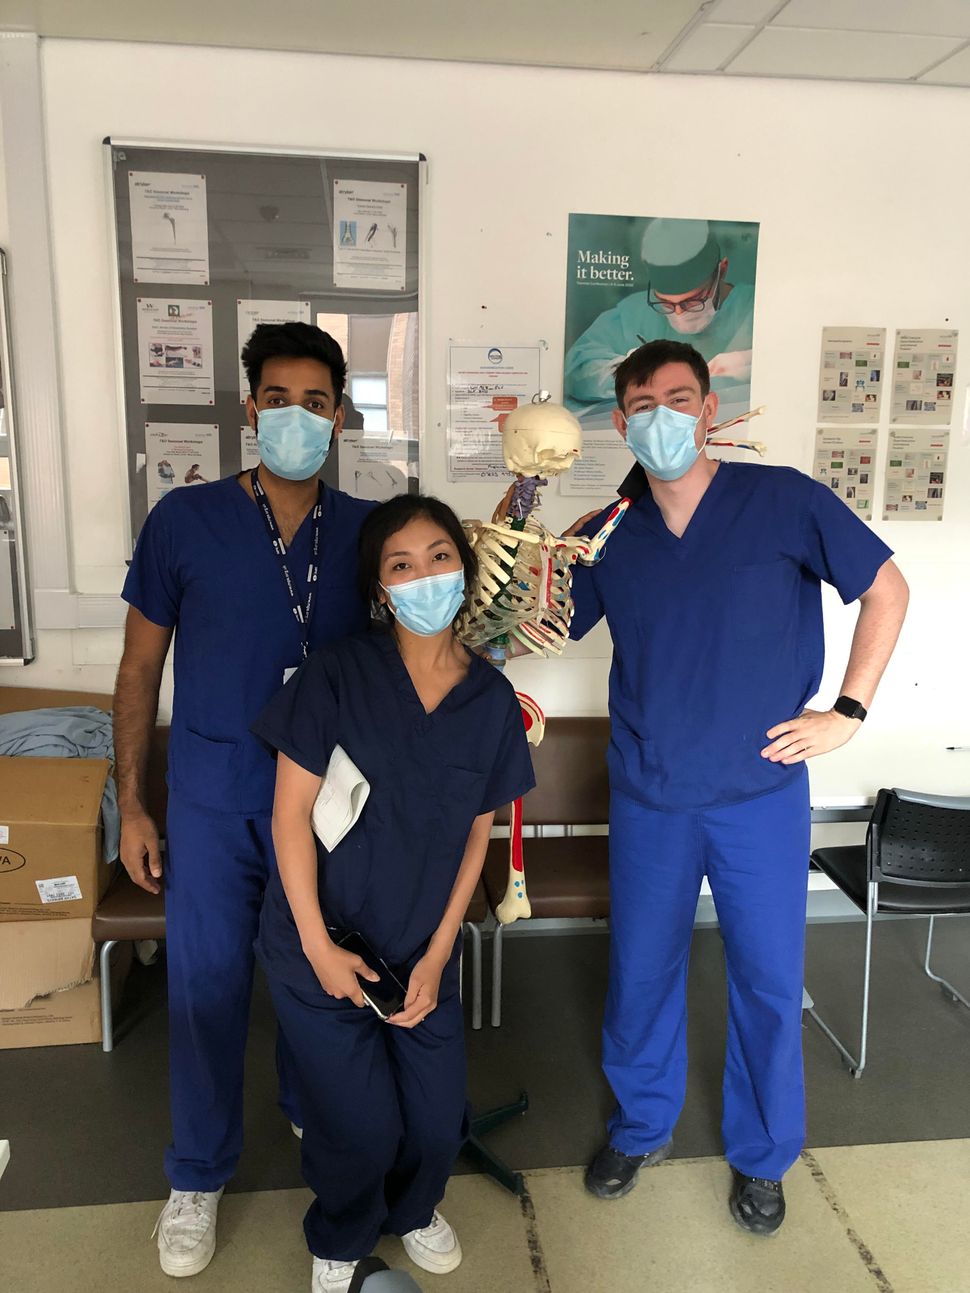 Dr Kiran (far left) with two colleagues at the hospital.